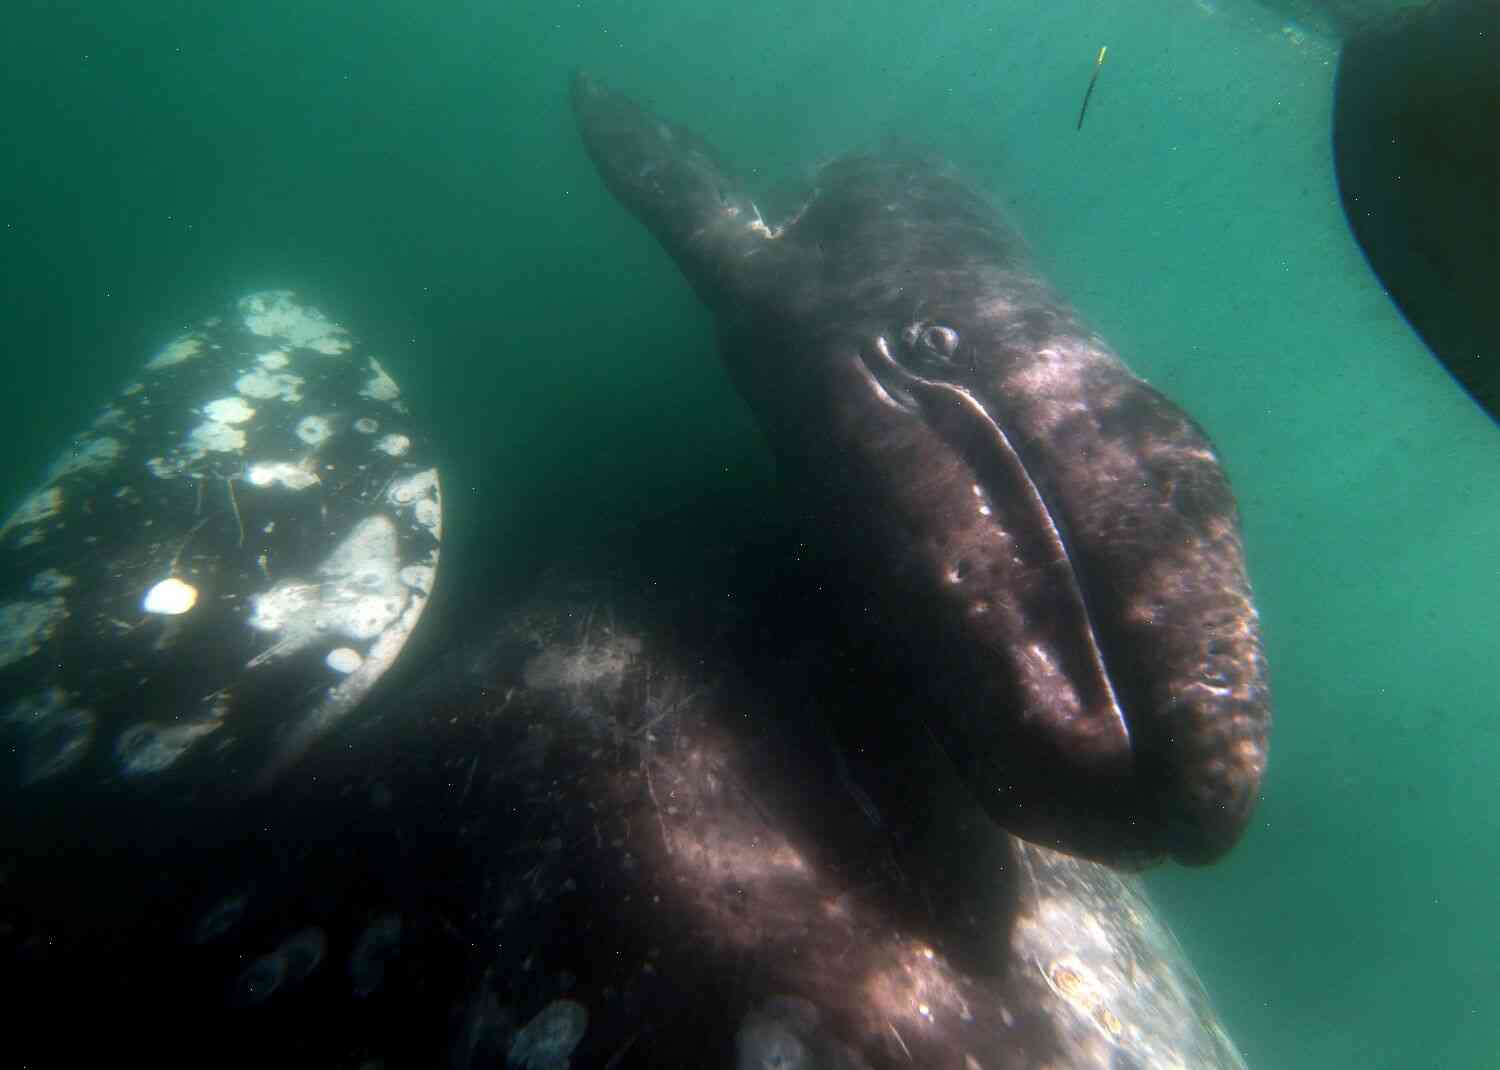 The California Gray Whale Population Could Be At Risk of Extinction